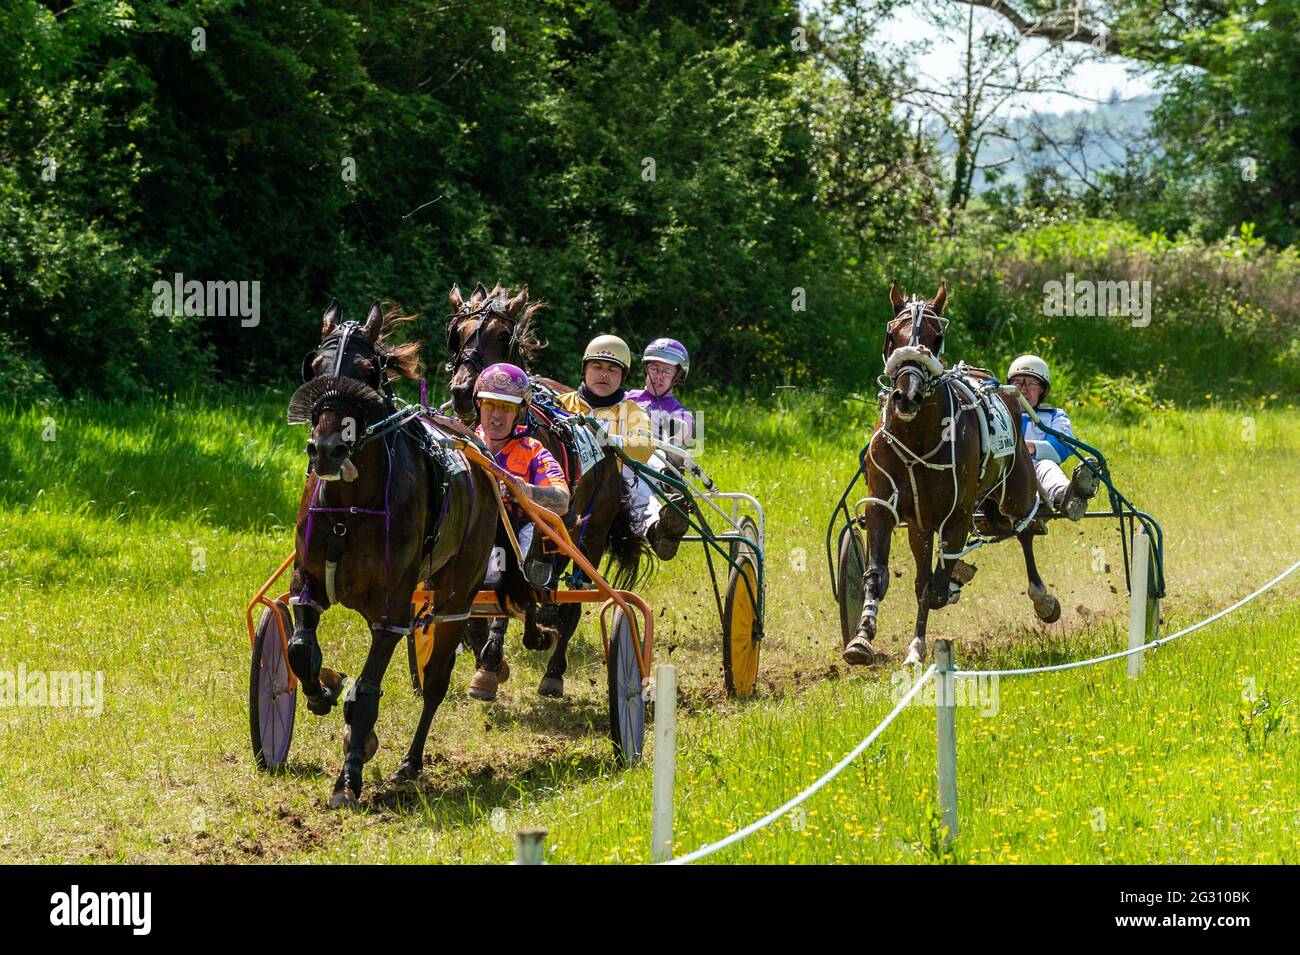 Dunmanway, West Cork, Ireland. 13th June, 2021. There was an 8 race card of  sulky racing at Ballabuidhe Race Track, Dunmanway today, with spectators  taking full advantage of the sunshine on the